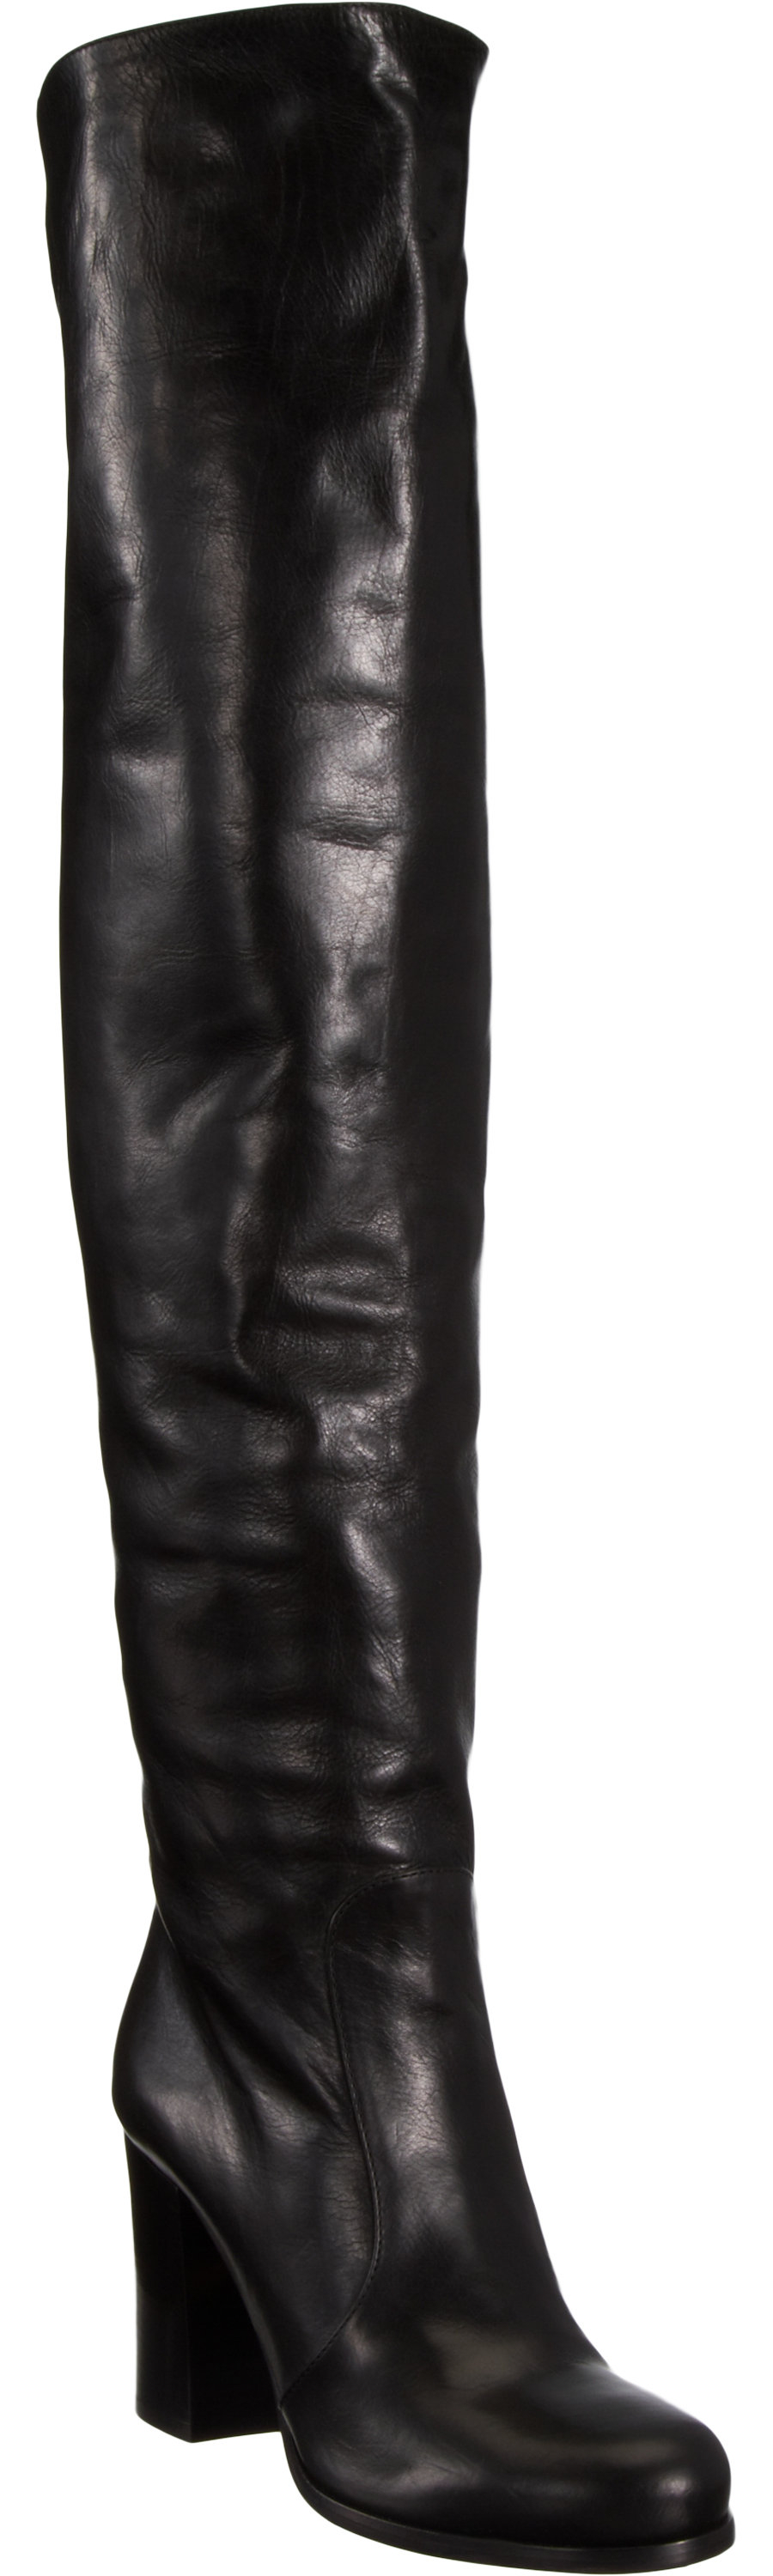 Lyst - Prada Slouchy Over-The-Knee Boot in Black